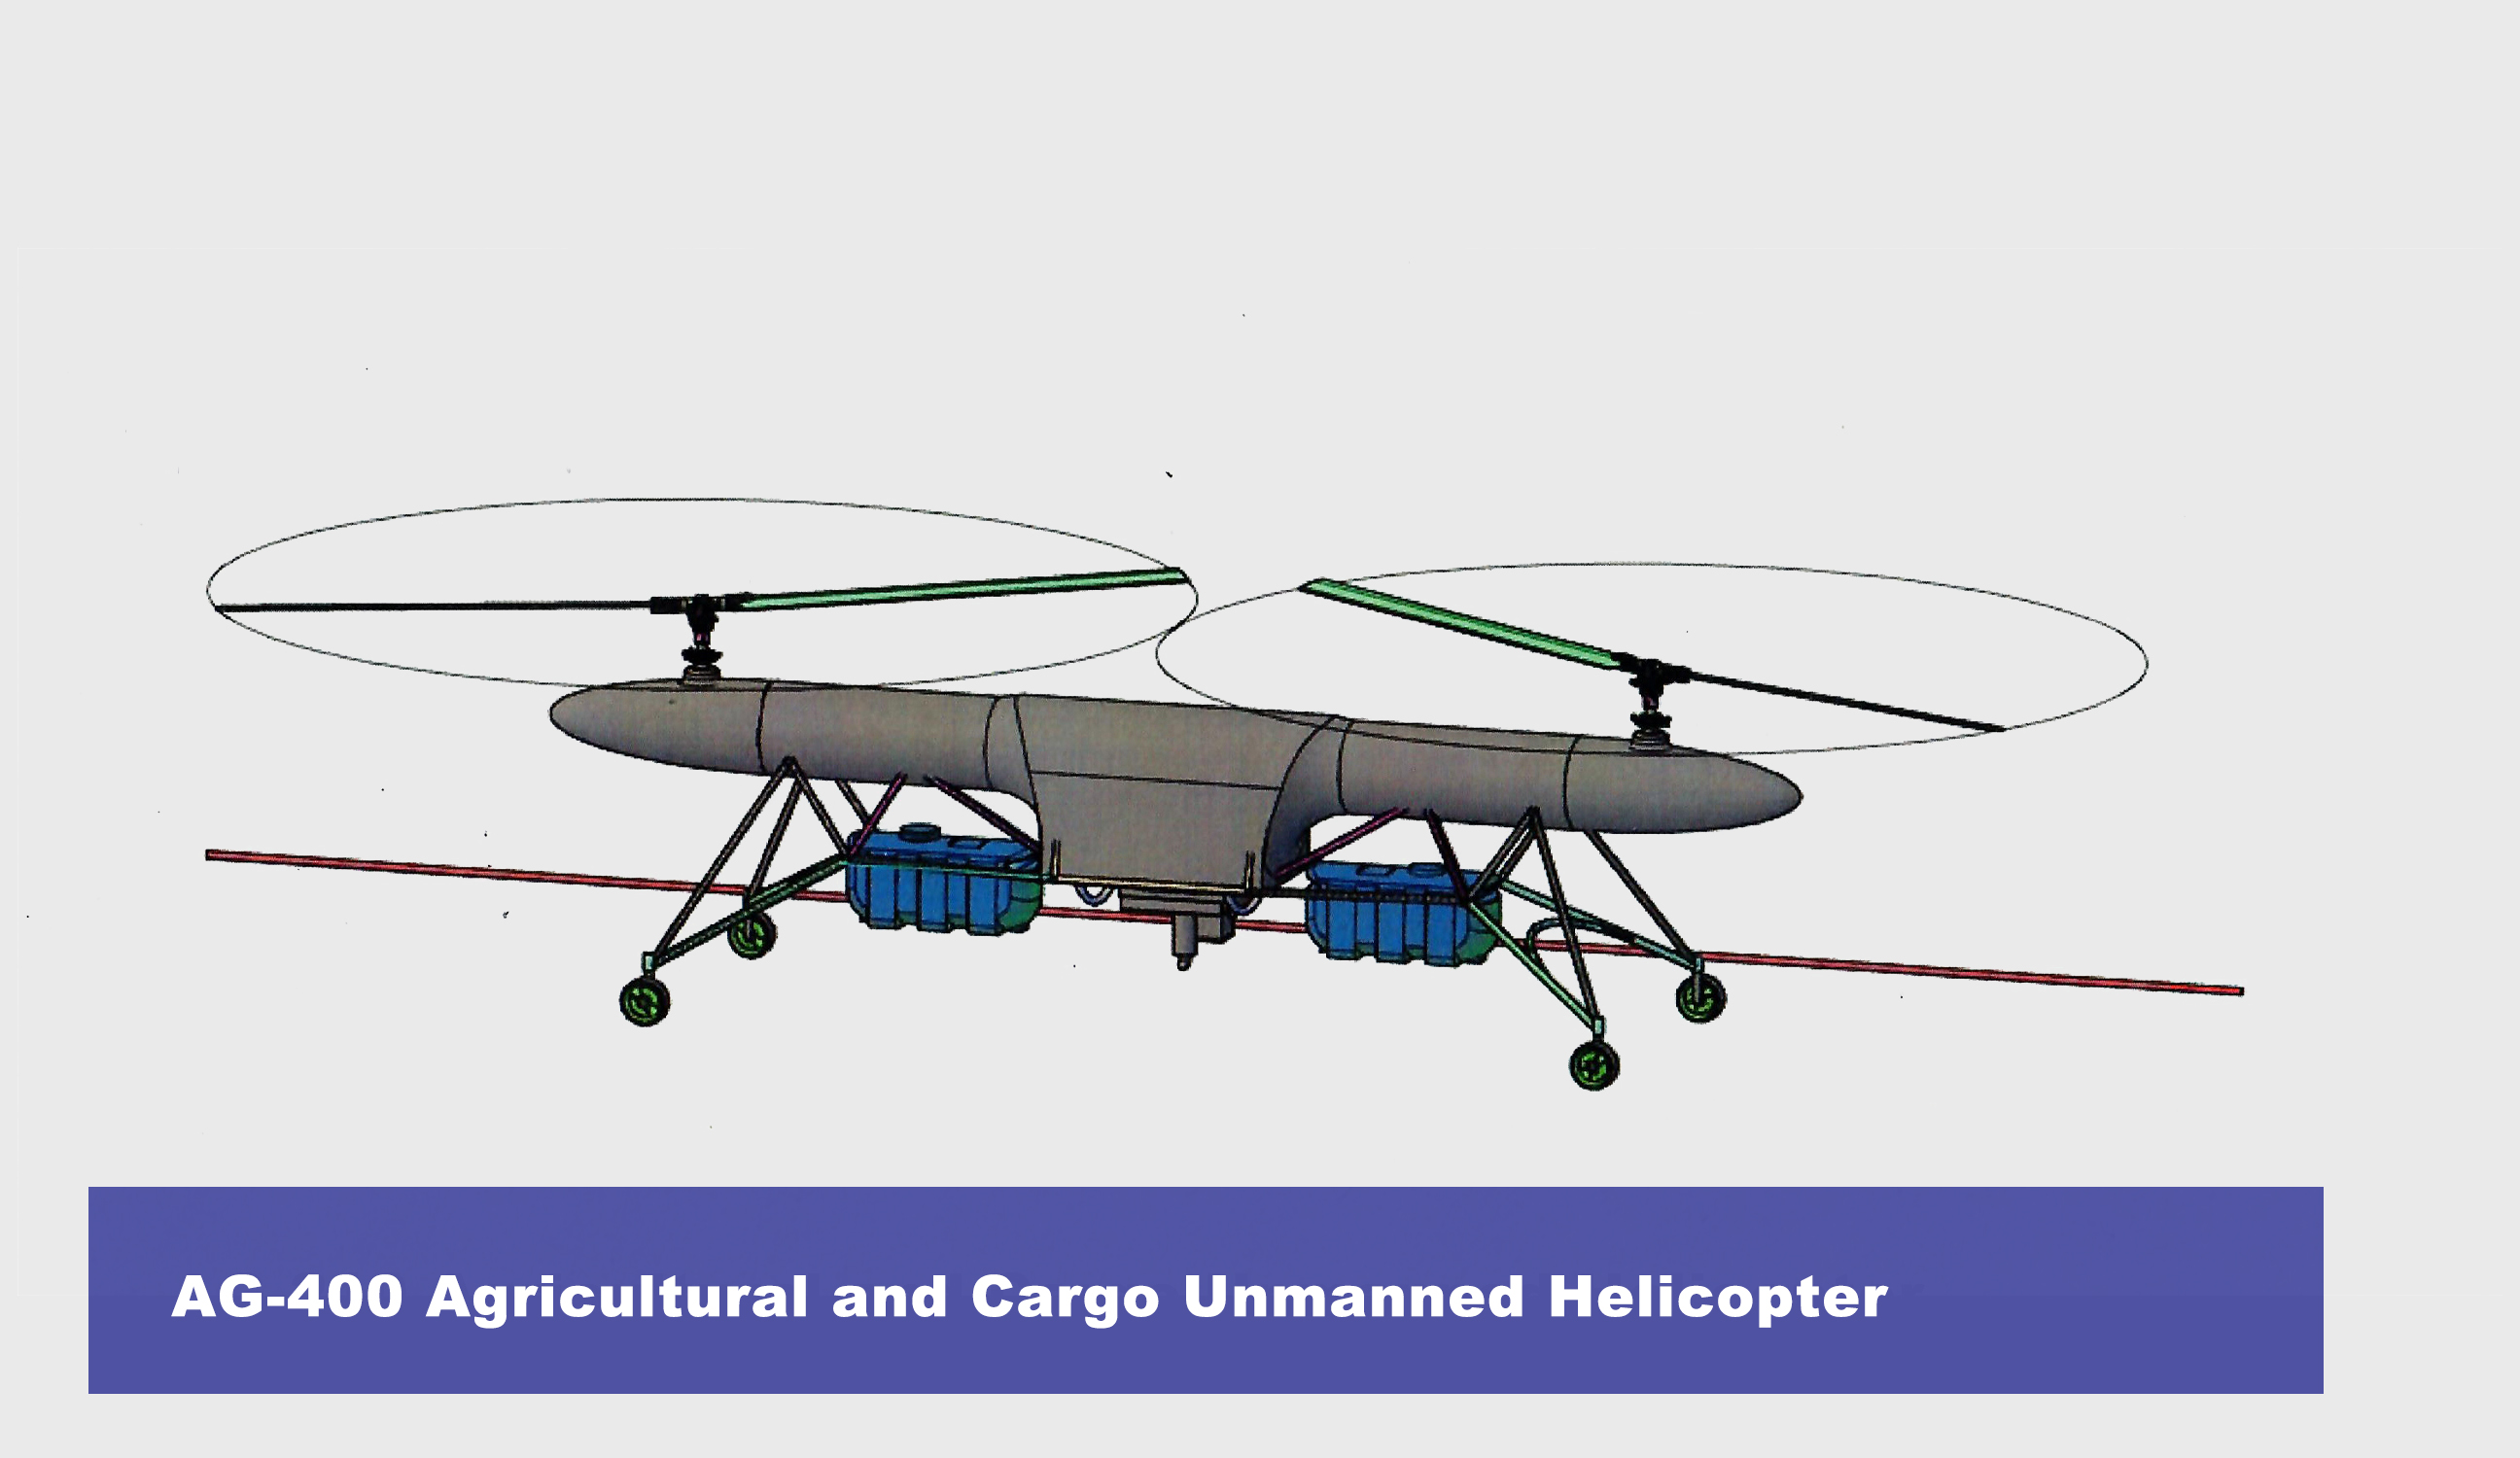 AG-400 Agricultural and Cargo Unmanned Helicopter